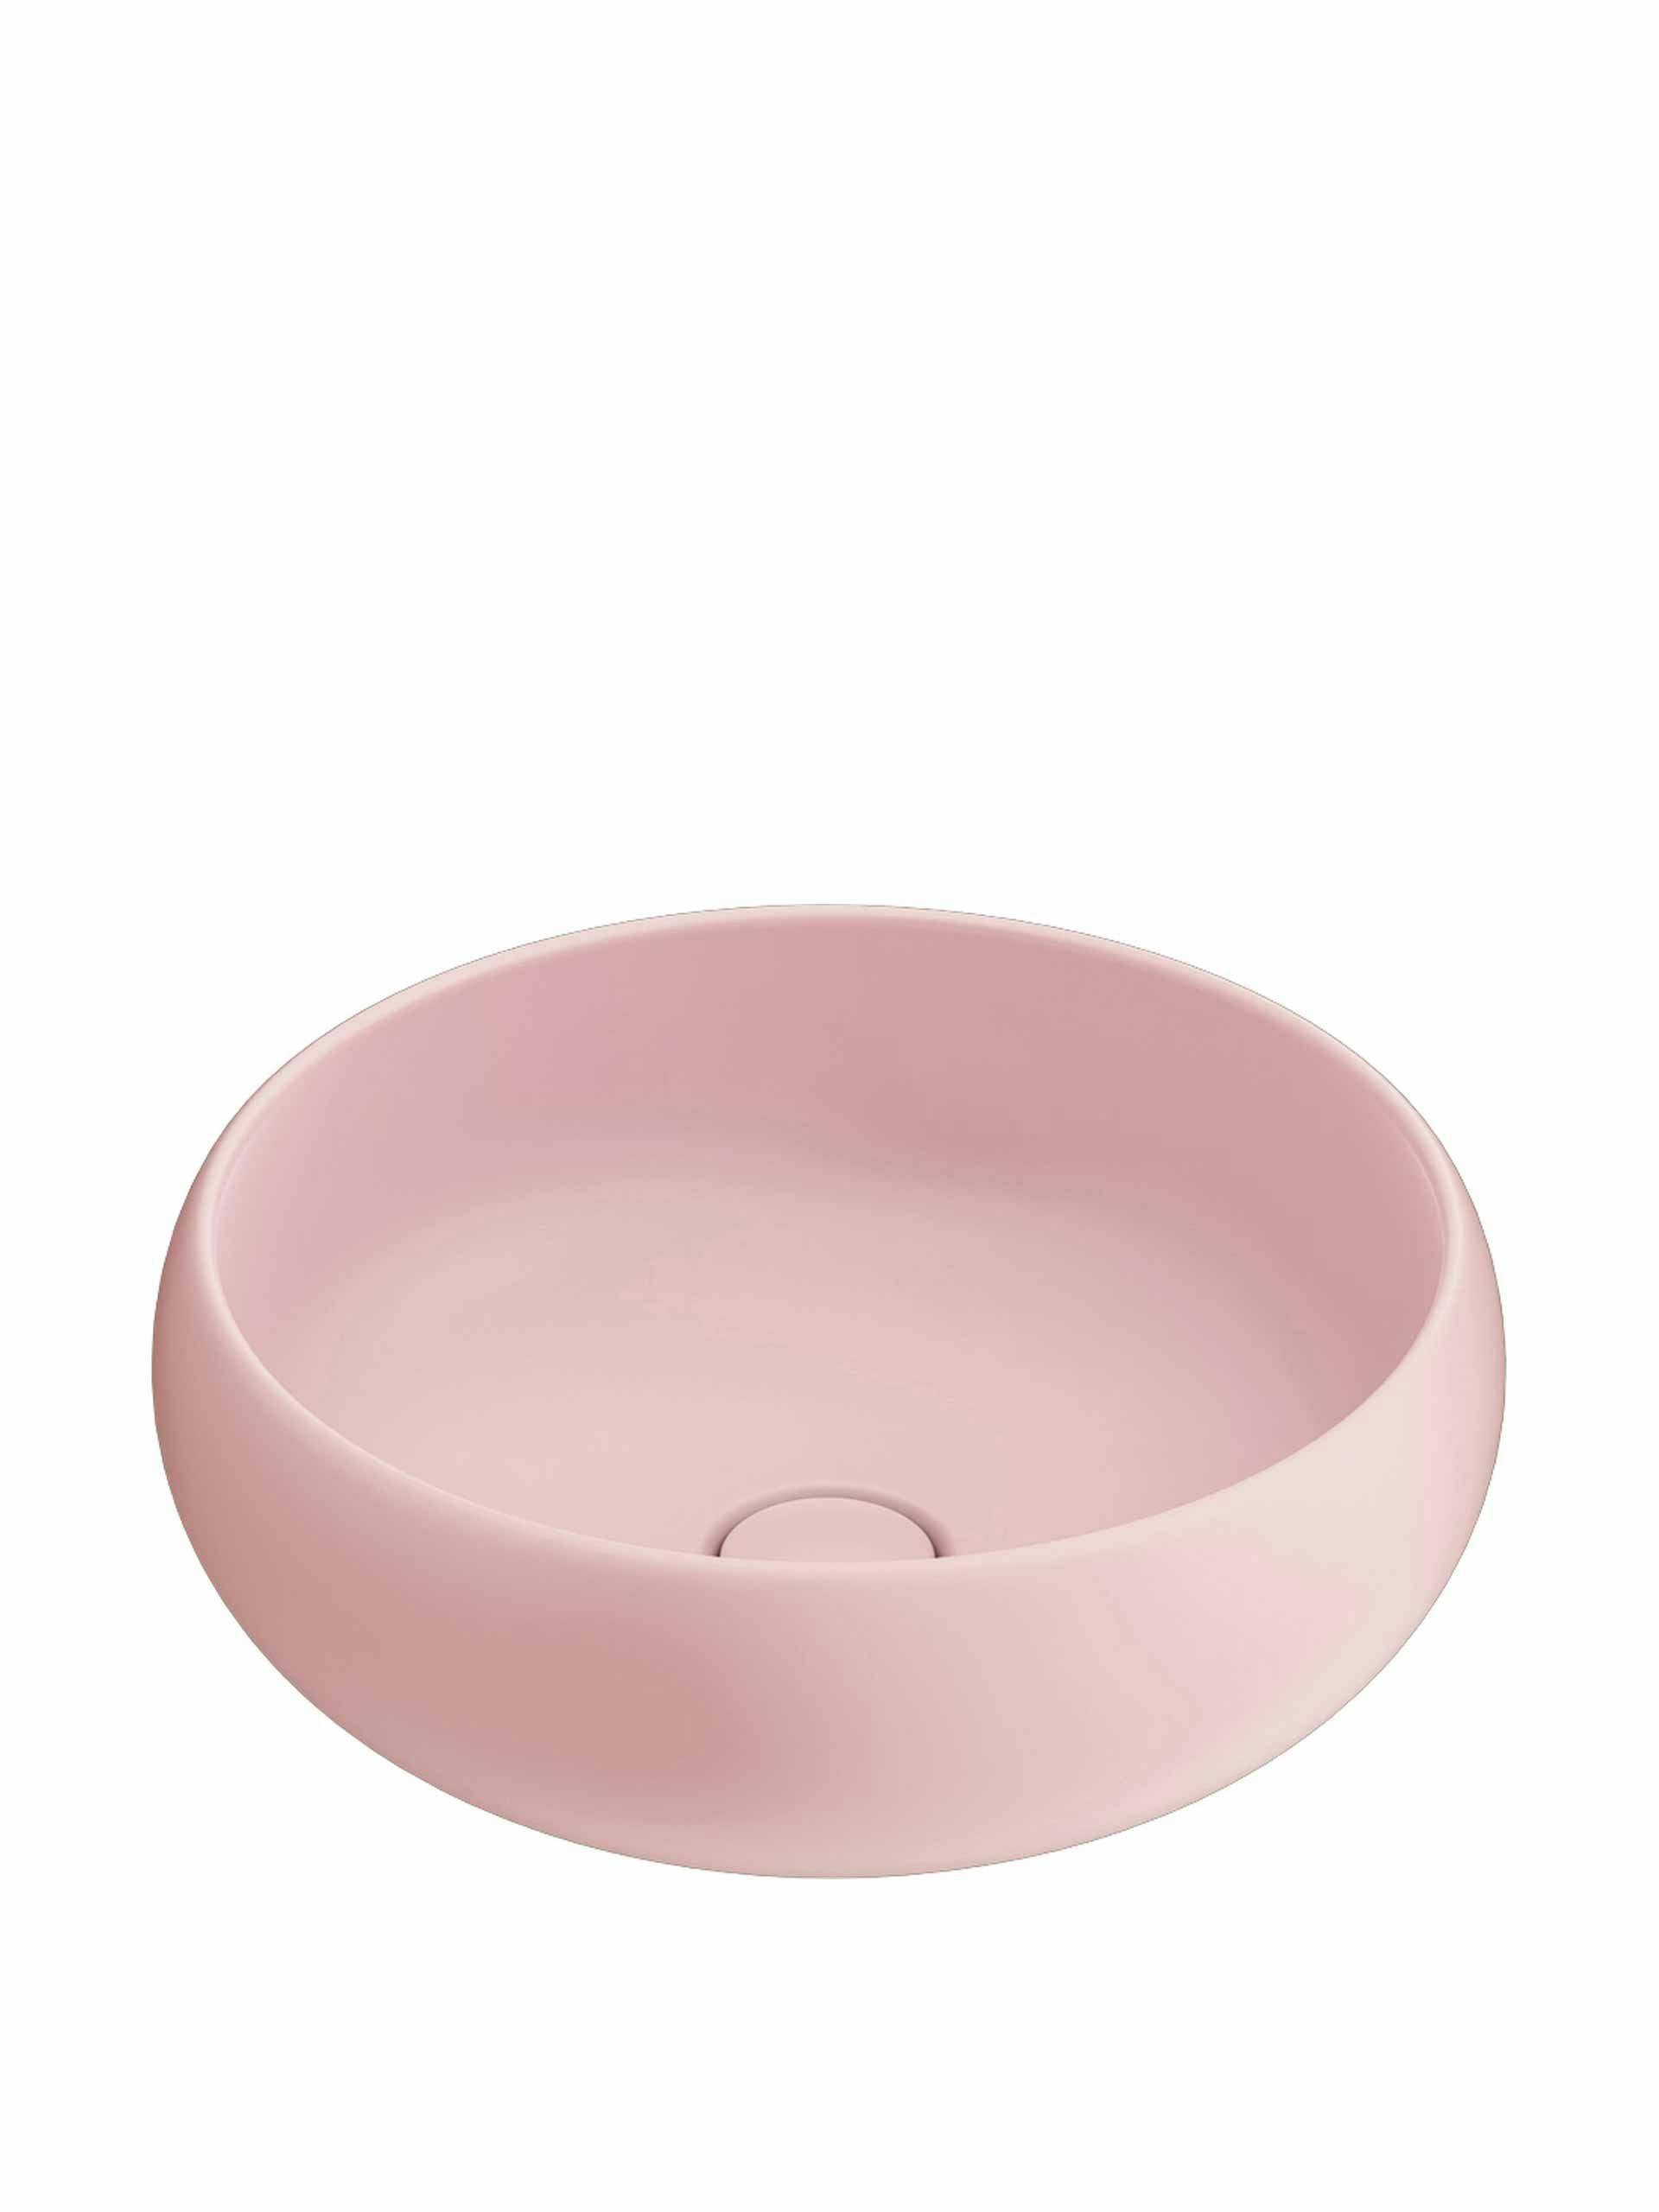 Round counter top basin - Pink